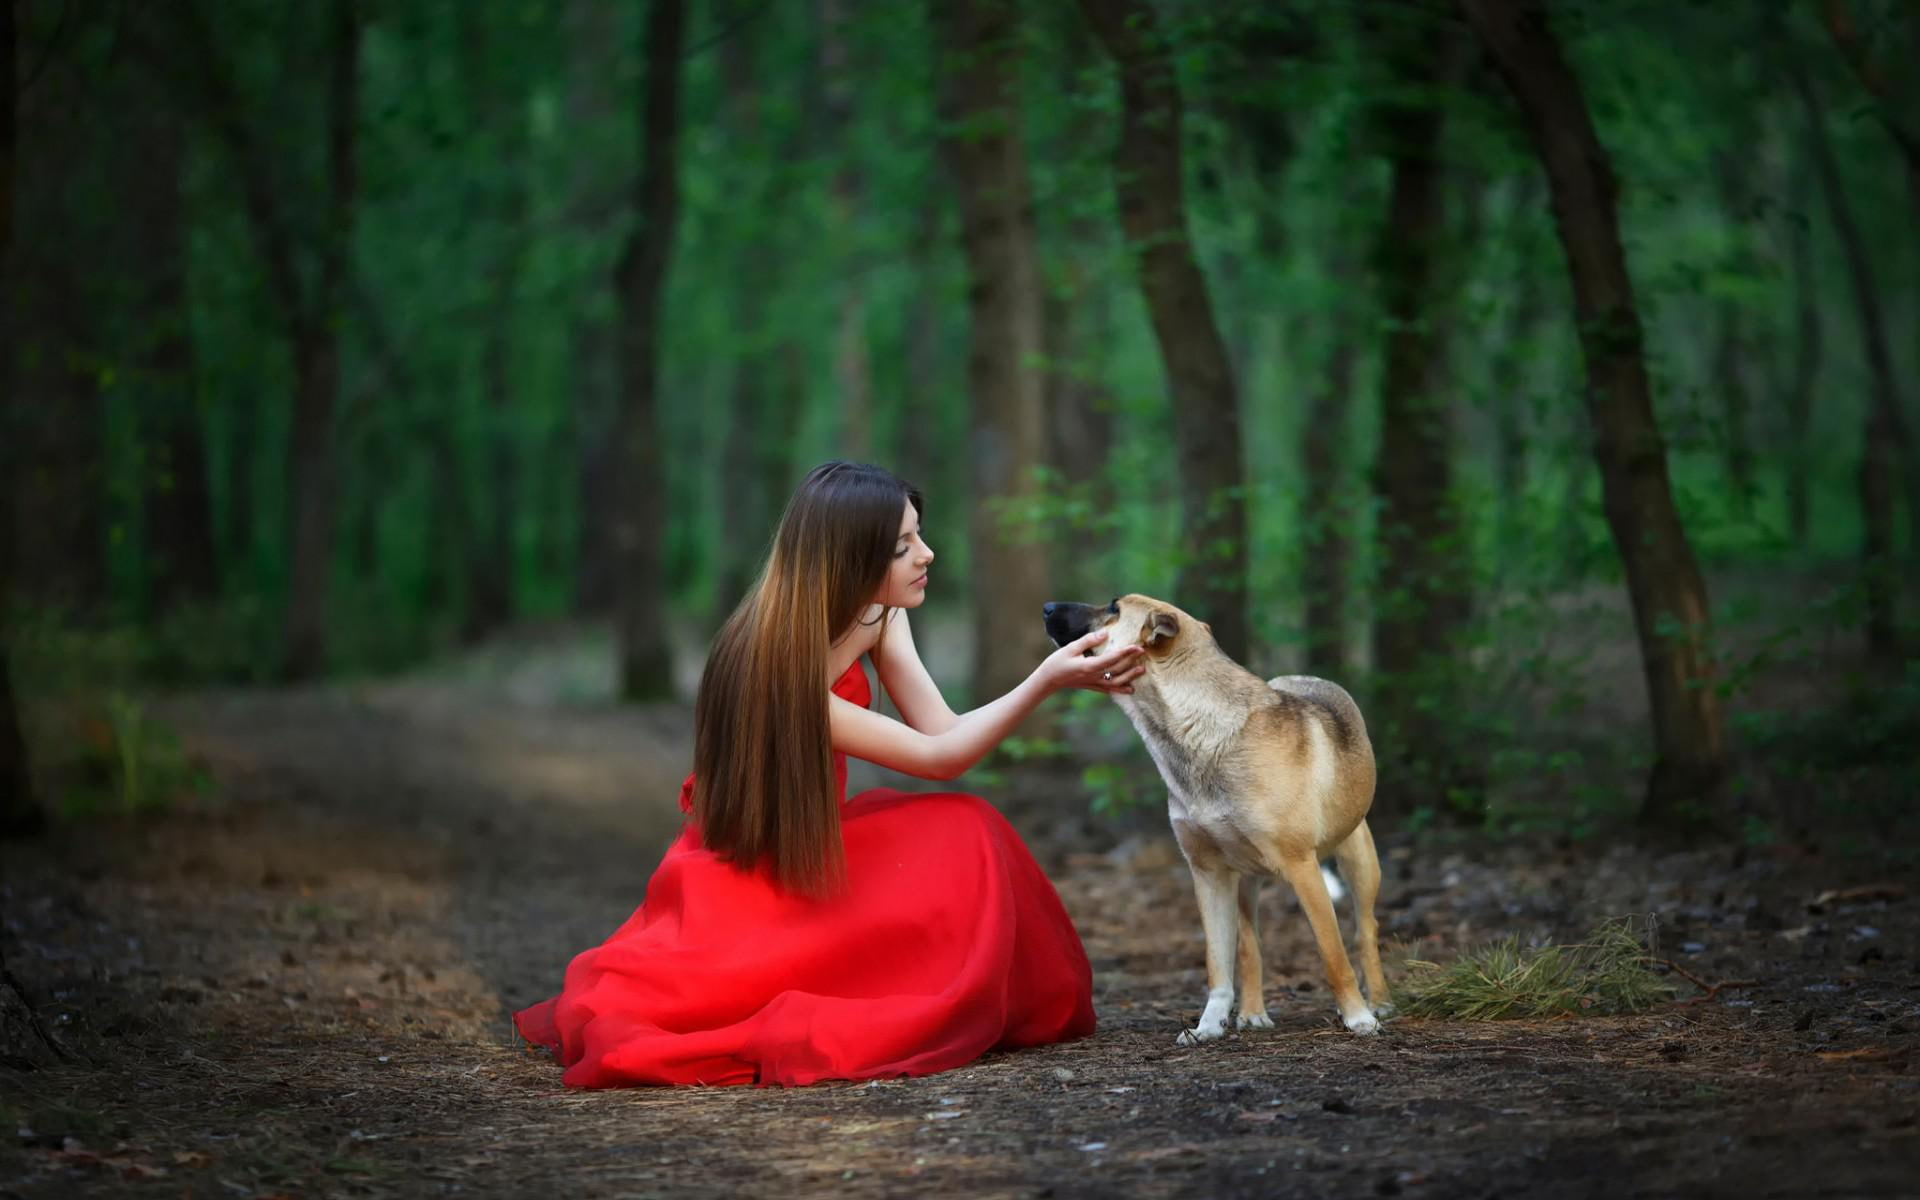 Red dress, forest, girl, dog, scenery